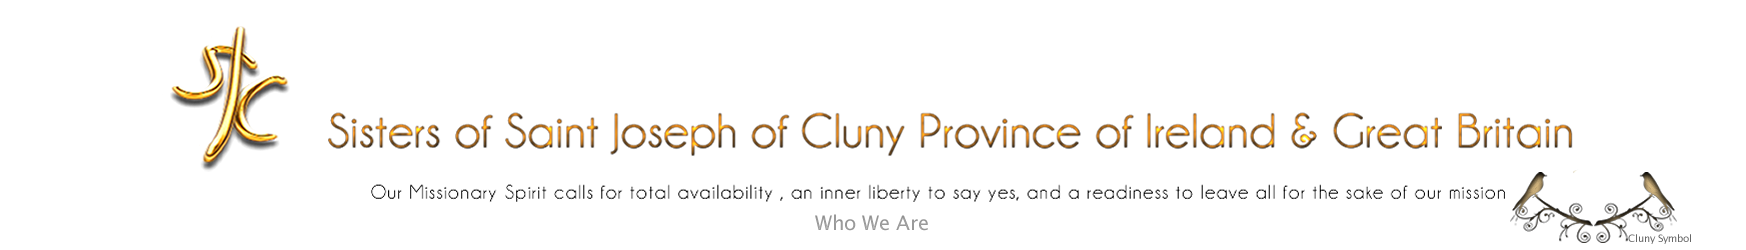 who are cluny